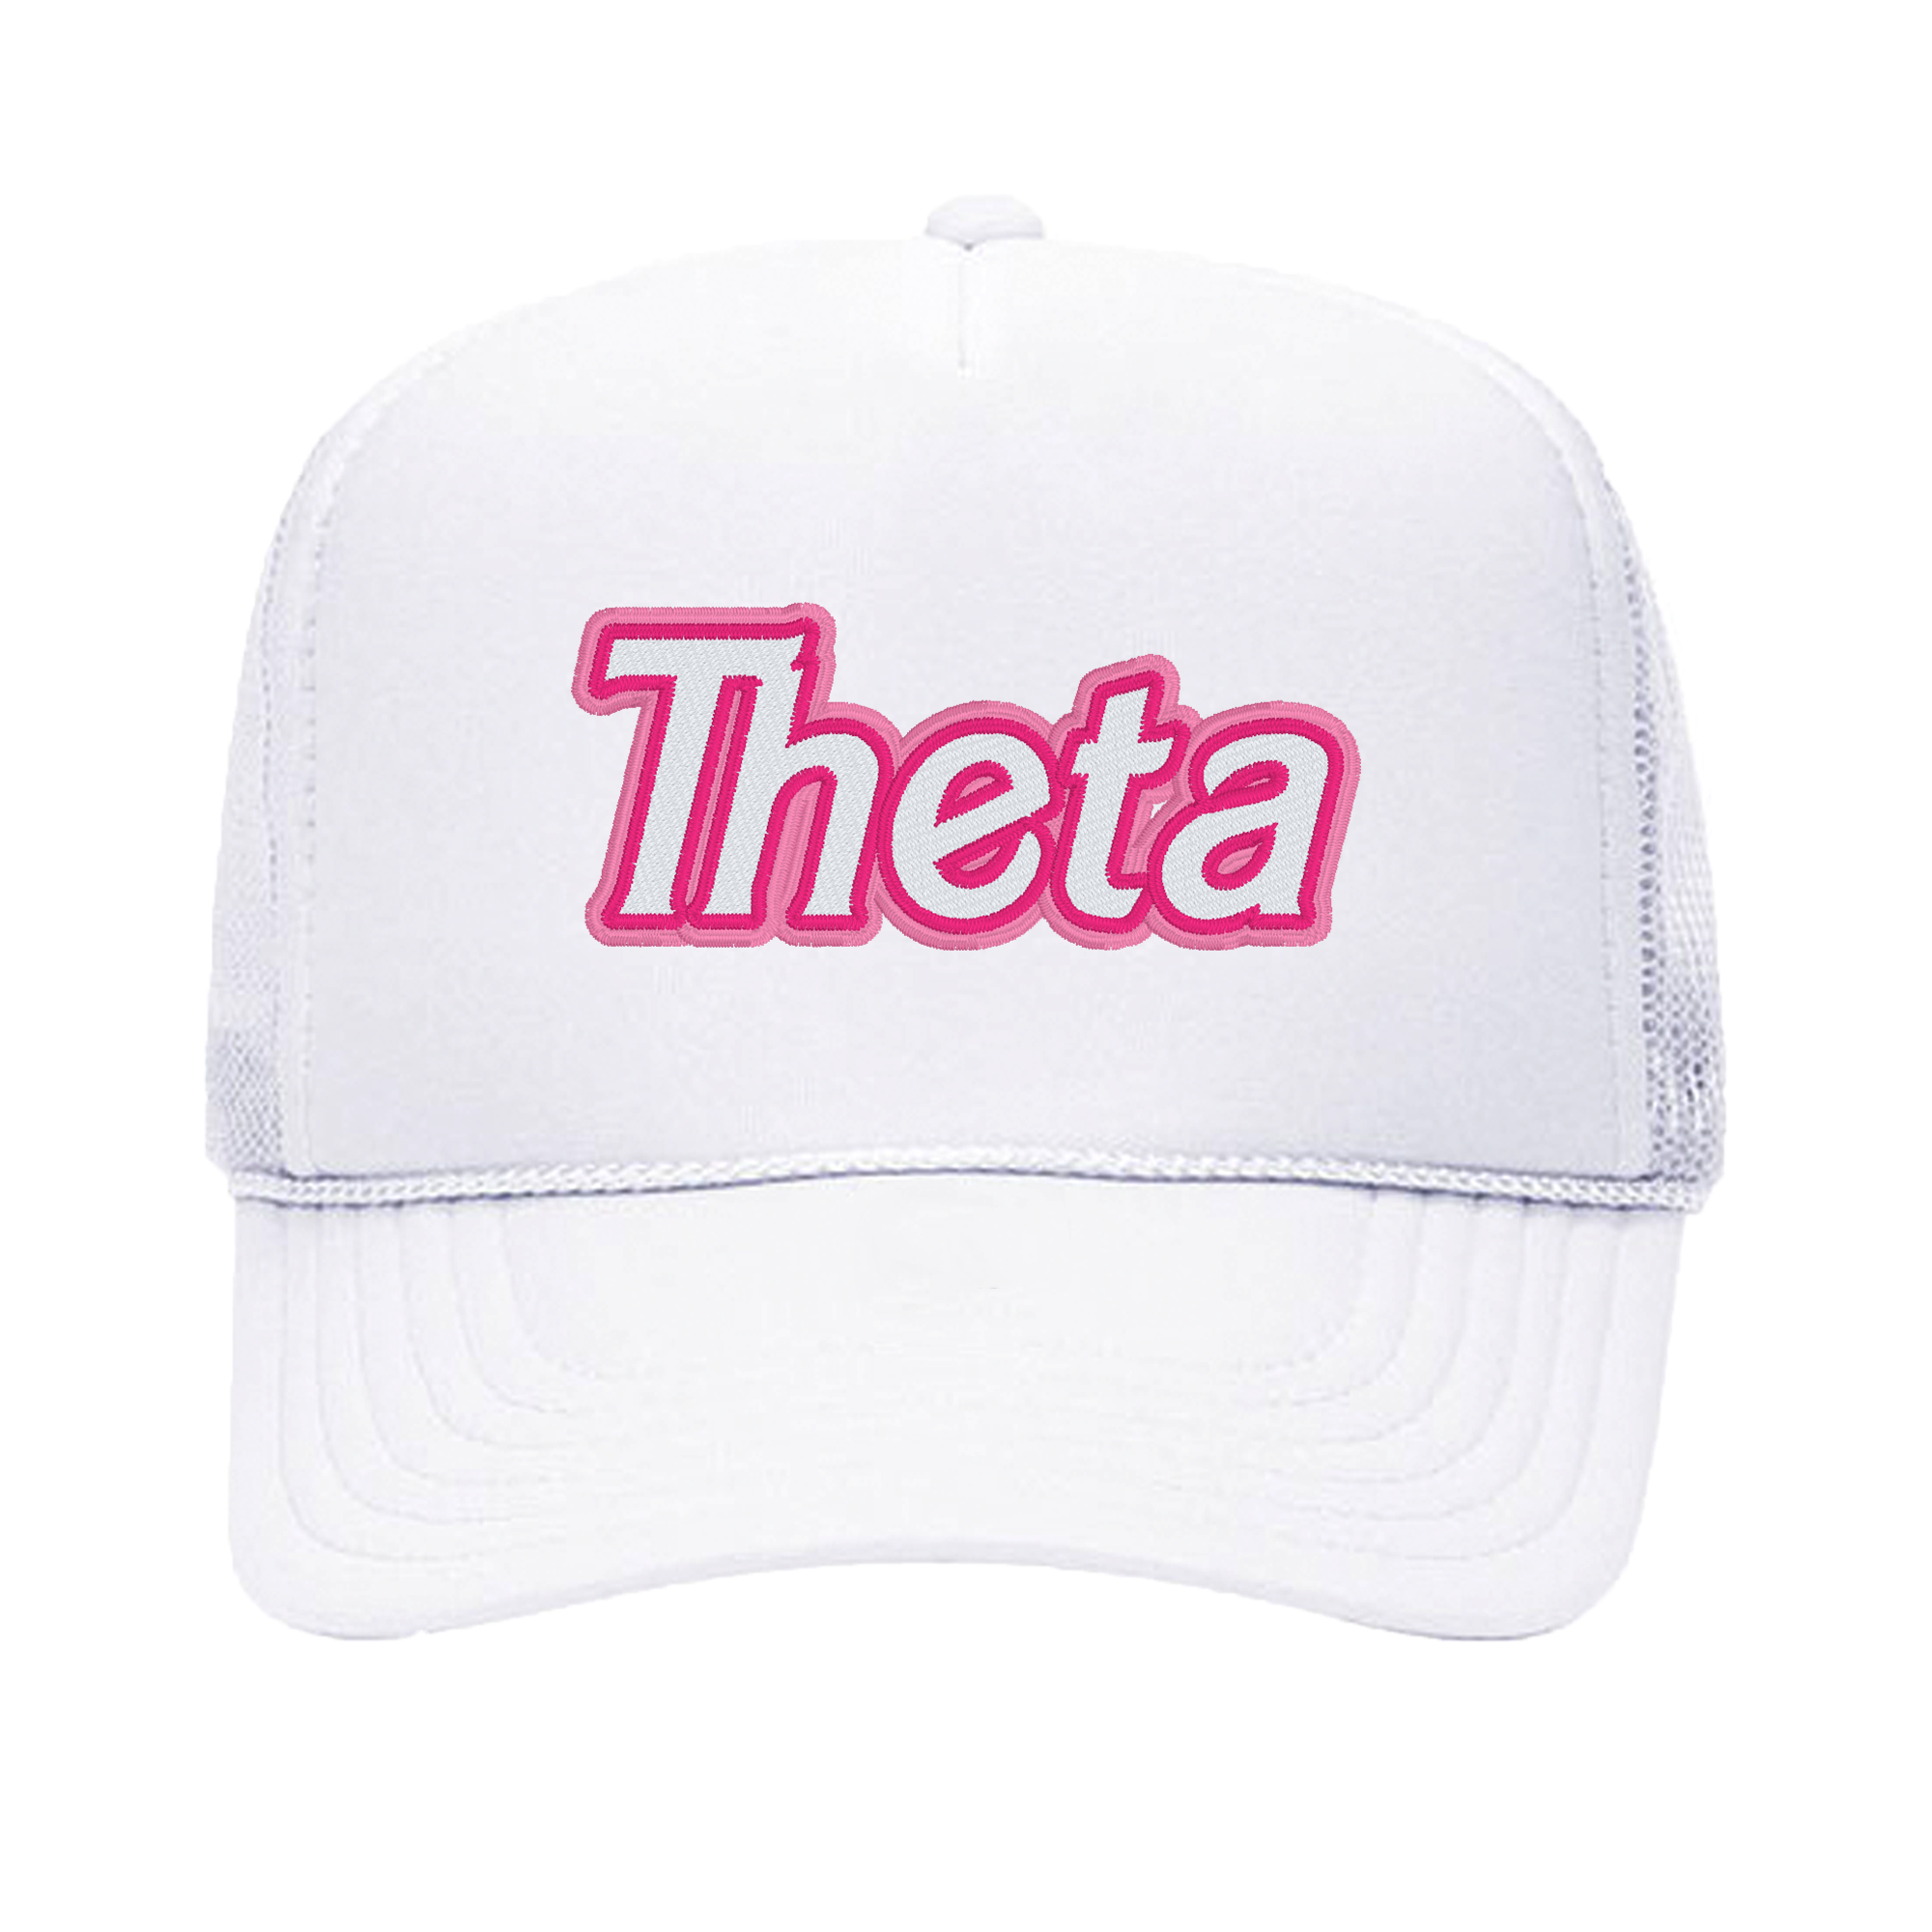 a white hat with the word theta printed on it